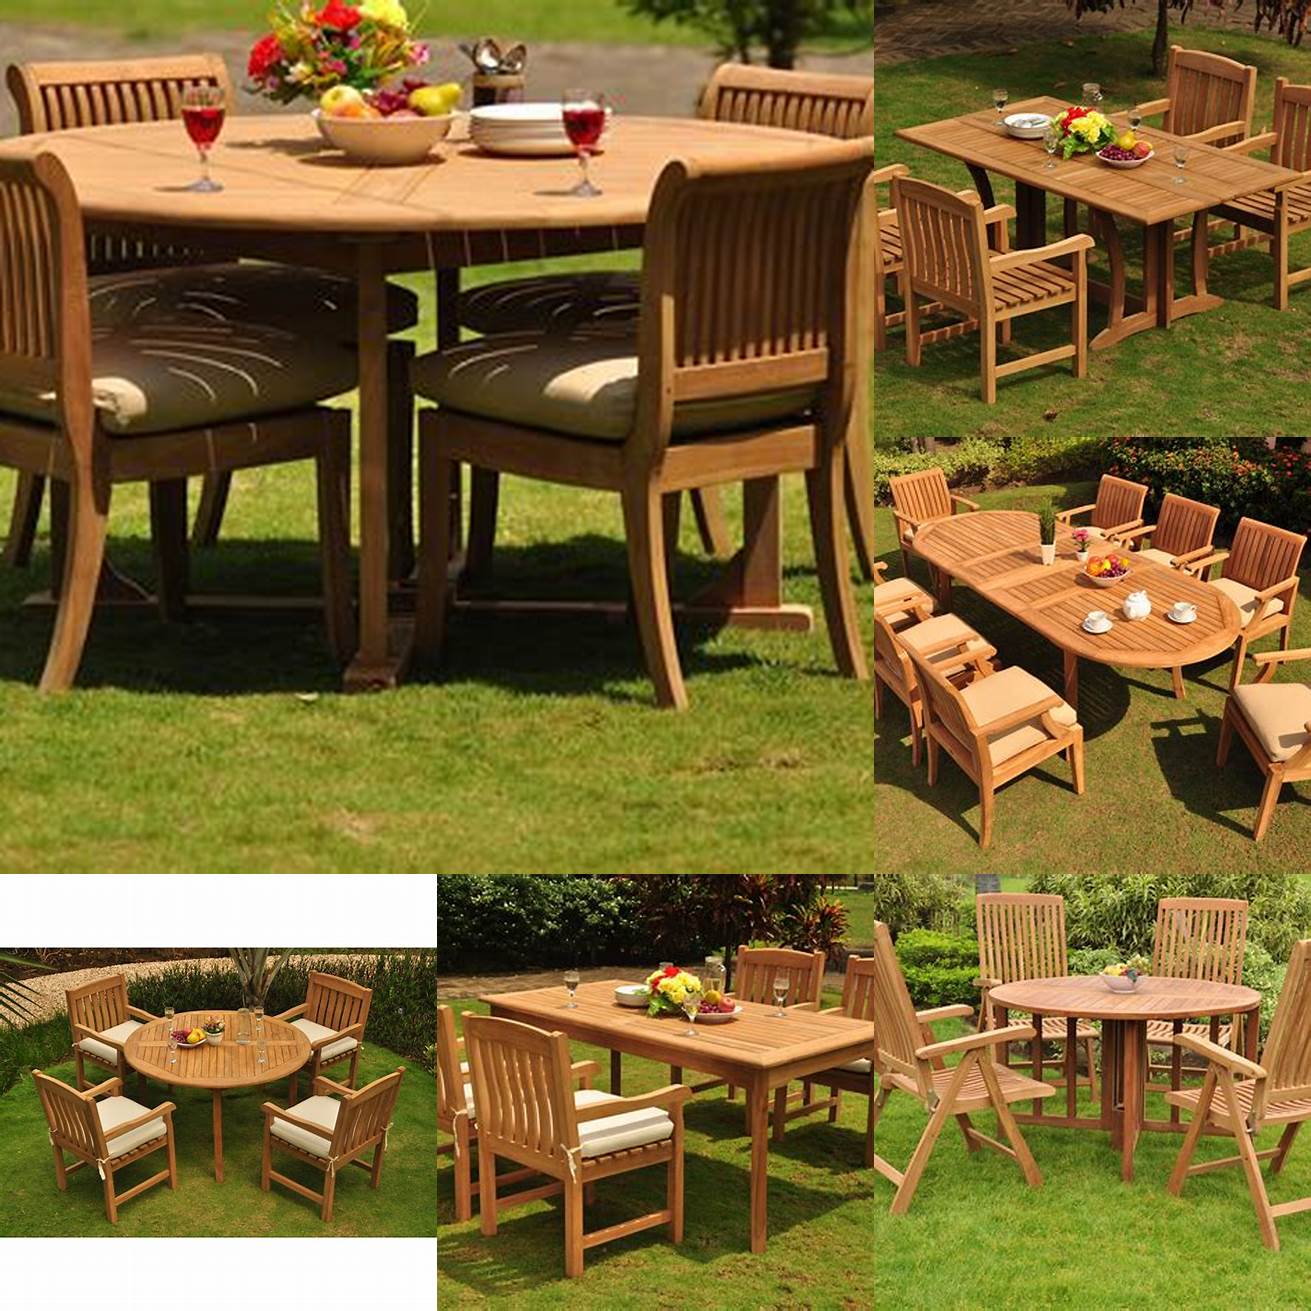 Teak Outdoor Dining Set with Table and Chairs